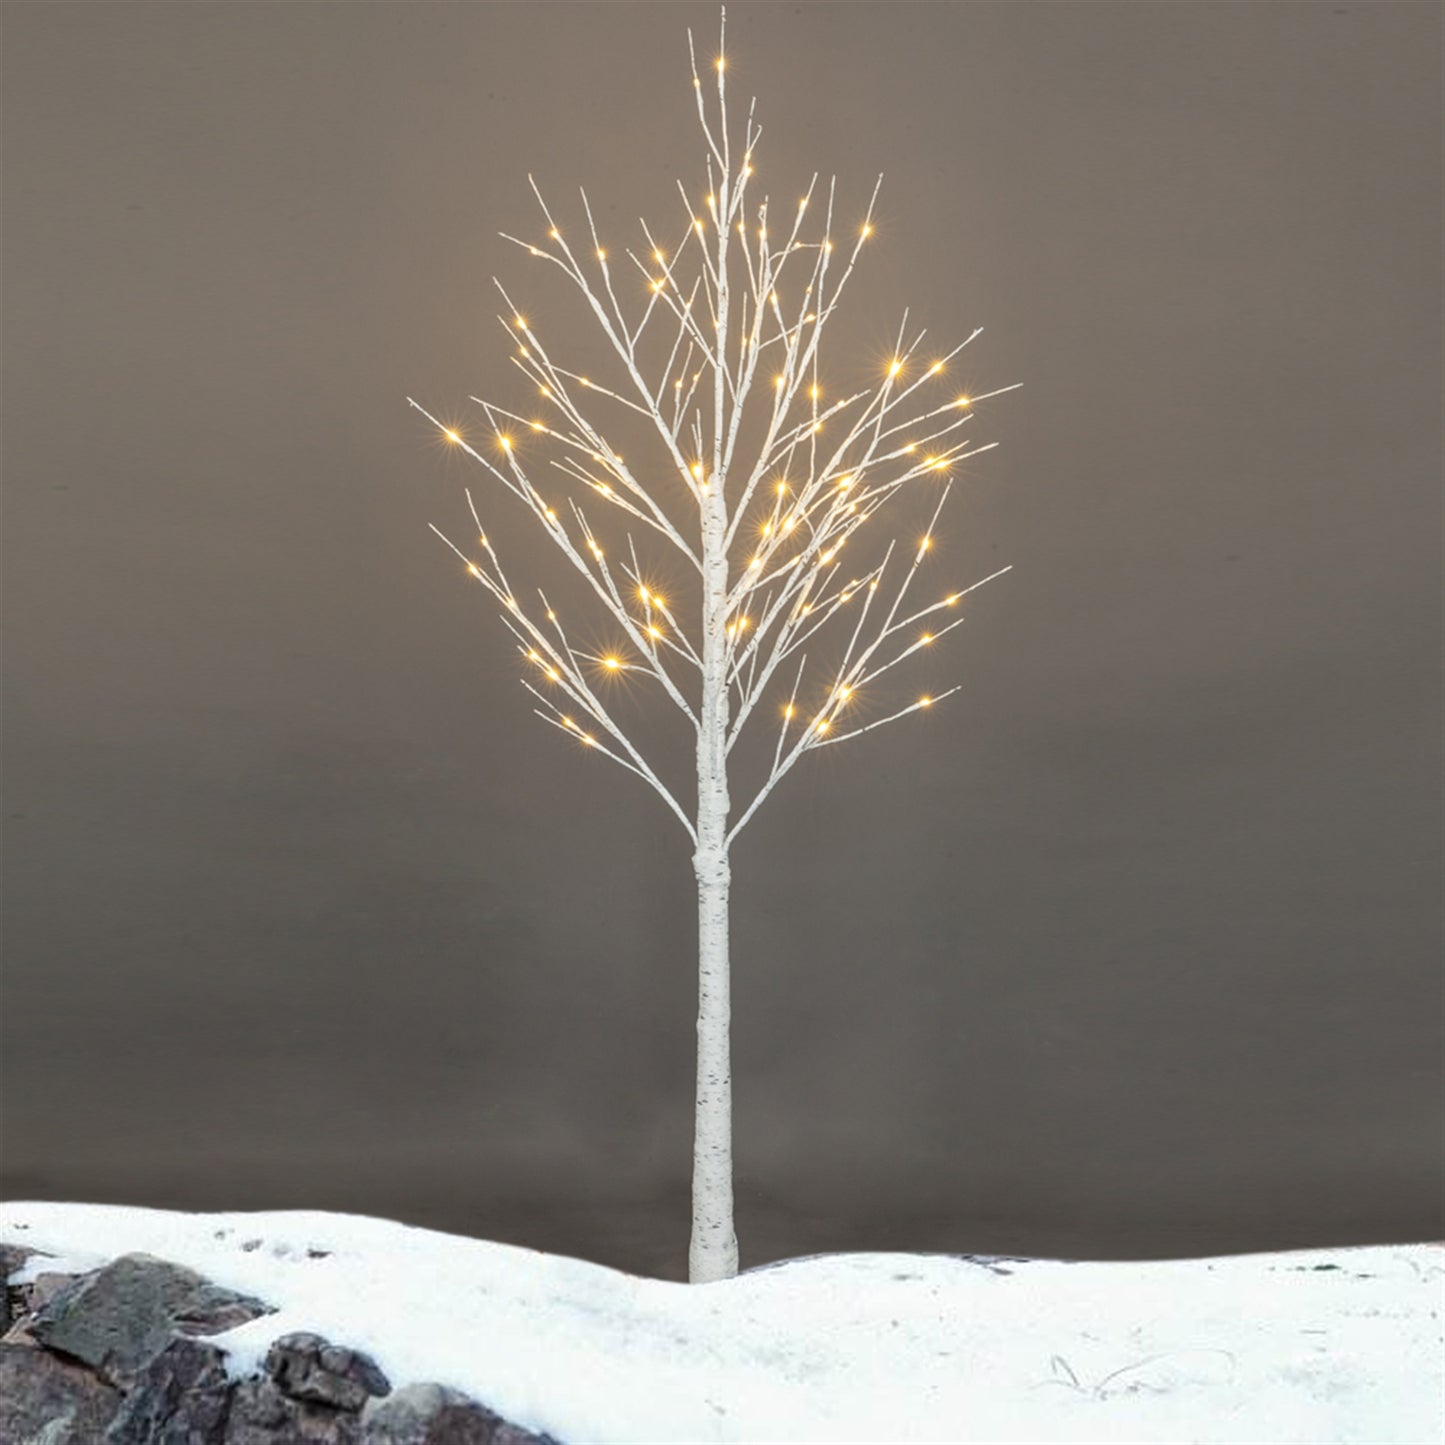 Pre-lit Birch Tree, 3 Pack 4FT 4FT 6FT Birch Tree with Warm White, White Christmas Tree Lights with Base, Decor for Christmas/Party/Wedding/Office/Home/Bedroom, Plug-in Indoor Outdoor Use, K979